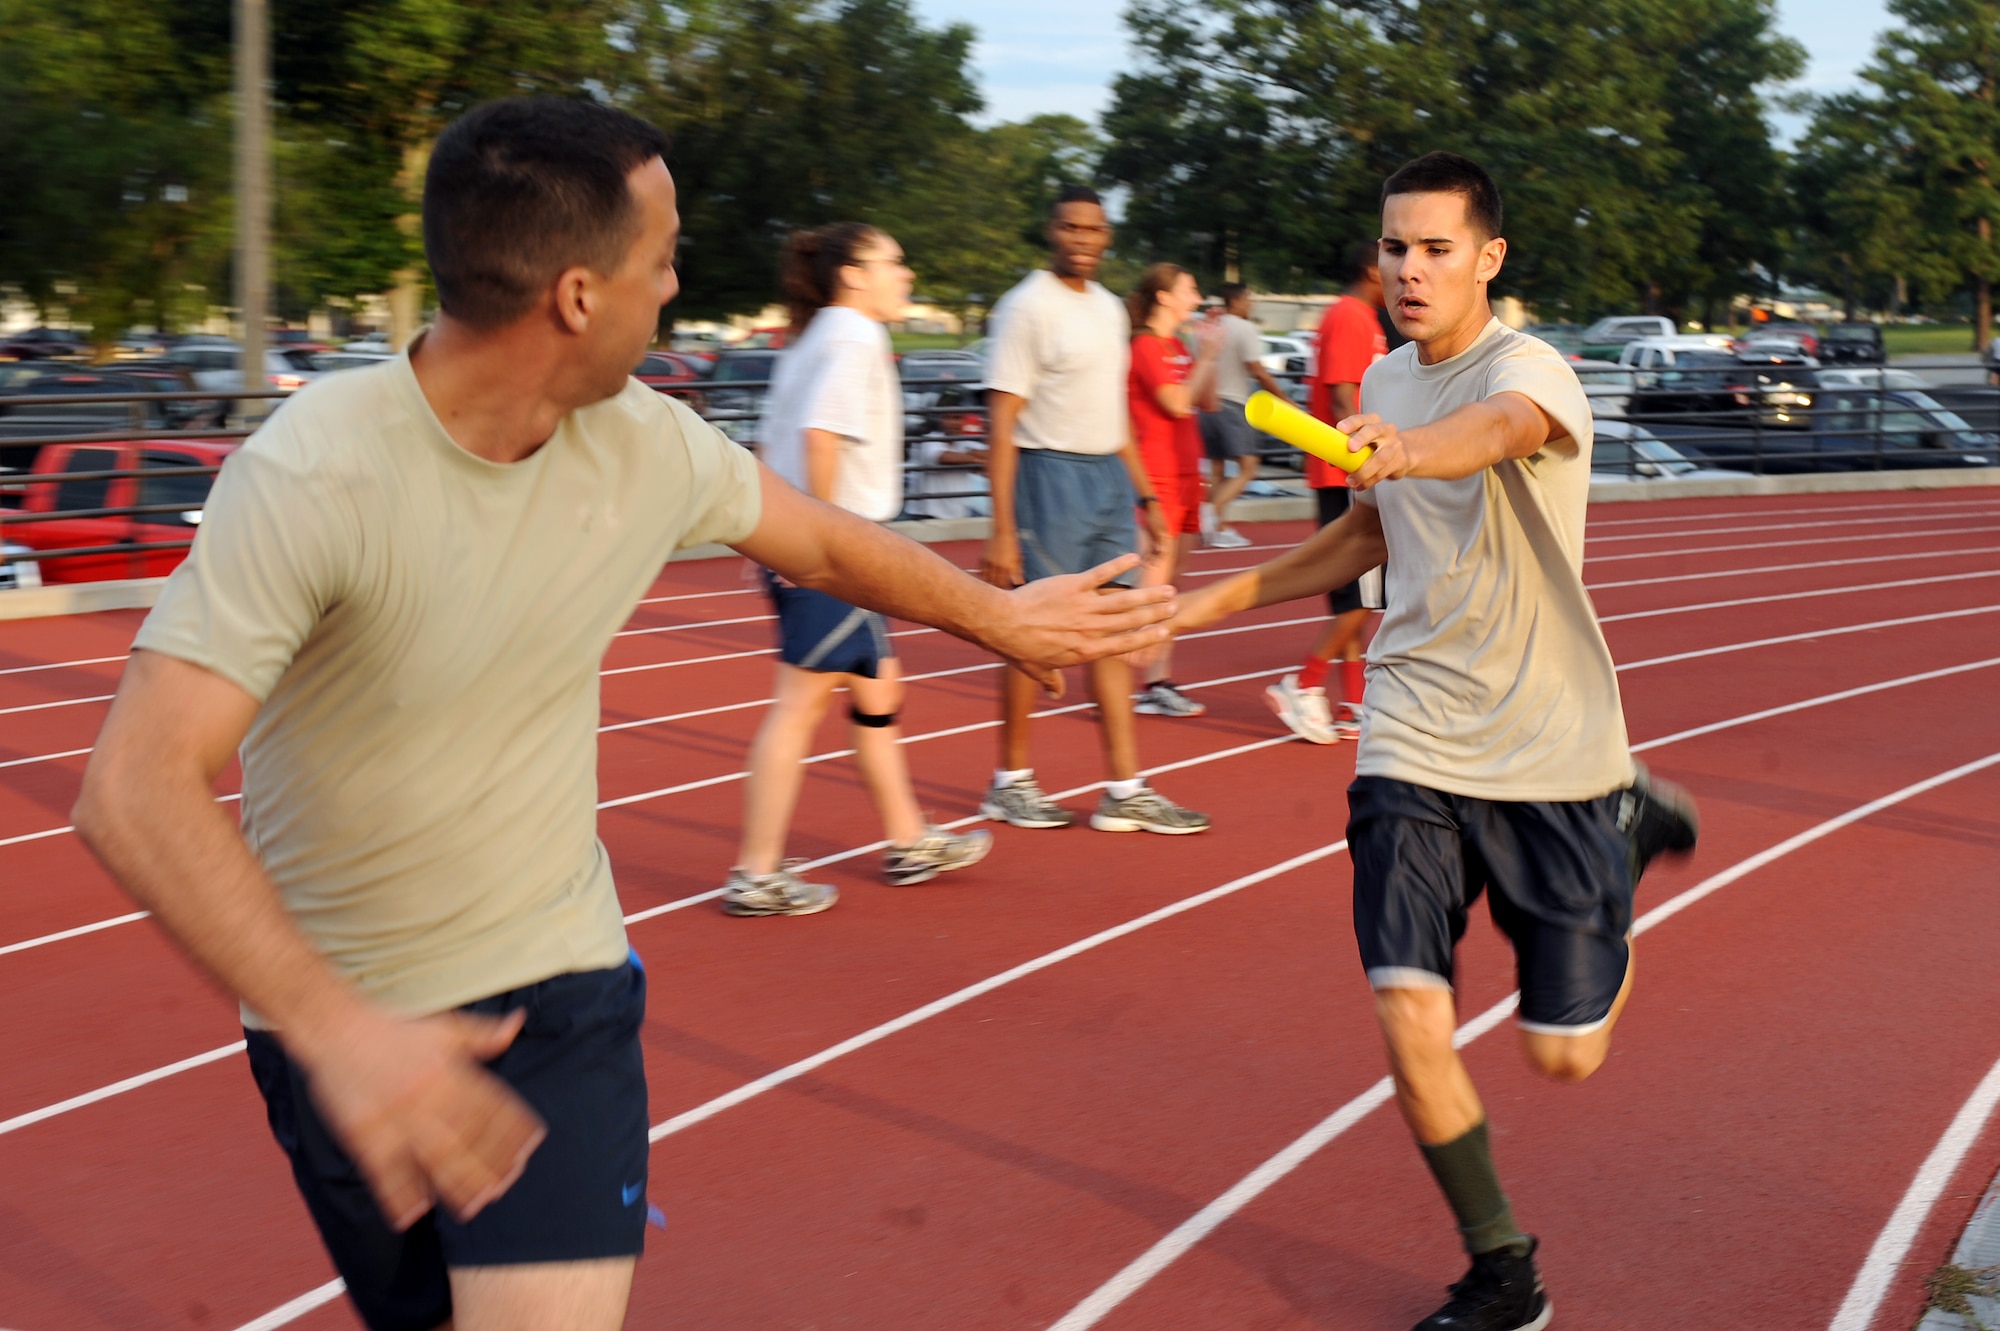 U.S. Air Force Tech. Sgt. Brian Knispel, 482nd Aircraft Maintenance Squadron aircraft electrician from Homestead Air Reserve Base, Fla., reaches out for a baton Senior Airman Christian Marrero-Santana, 482nd AMXS aircraft armament technician also from Homestead, during the Beat the Heat relay run at Seymour Johnson Air Force Base, N.C., Aug. 10, 2012. The 482nd AMXS team finished first with a time of 5:27. (U.S. Air Force photo/Airman 1st Class John Nieves Camacho/Released)